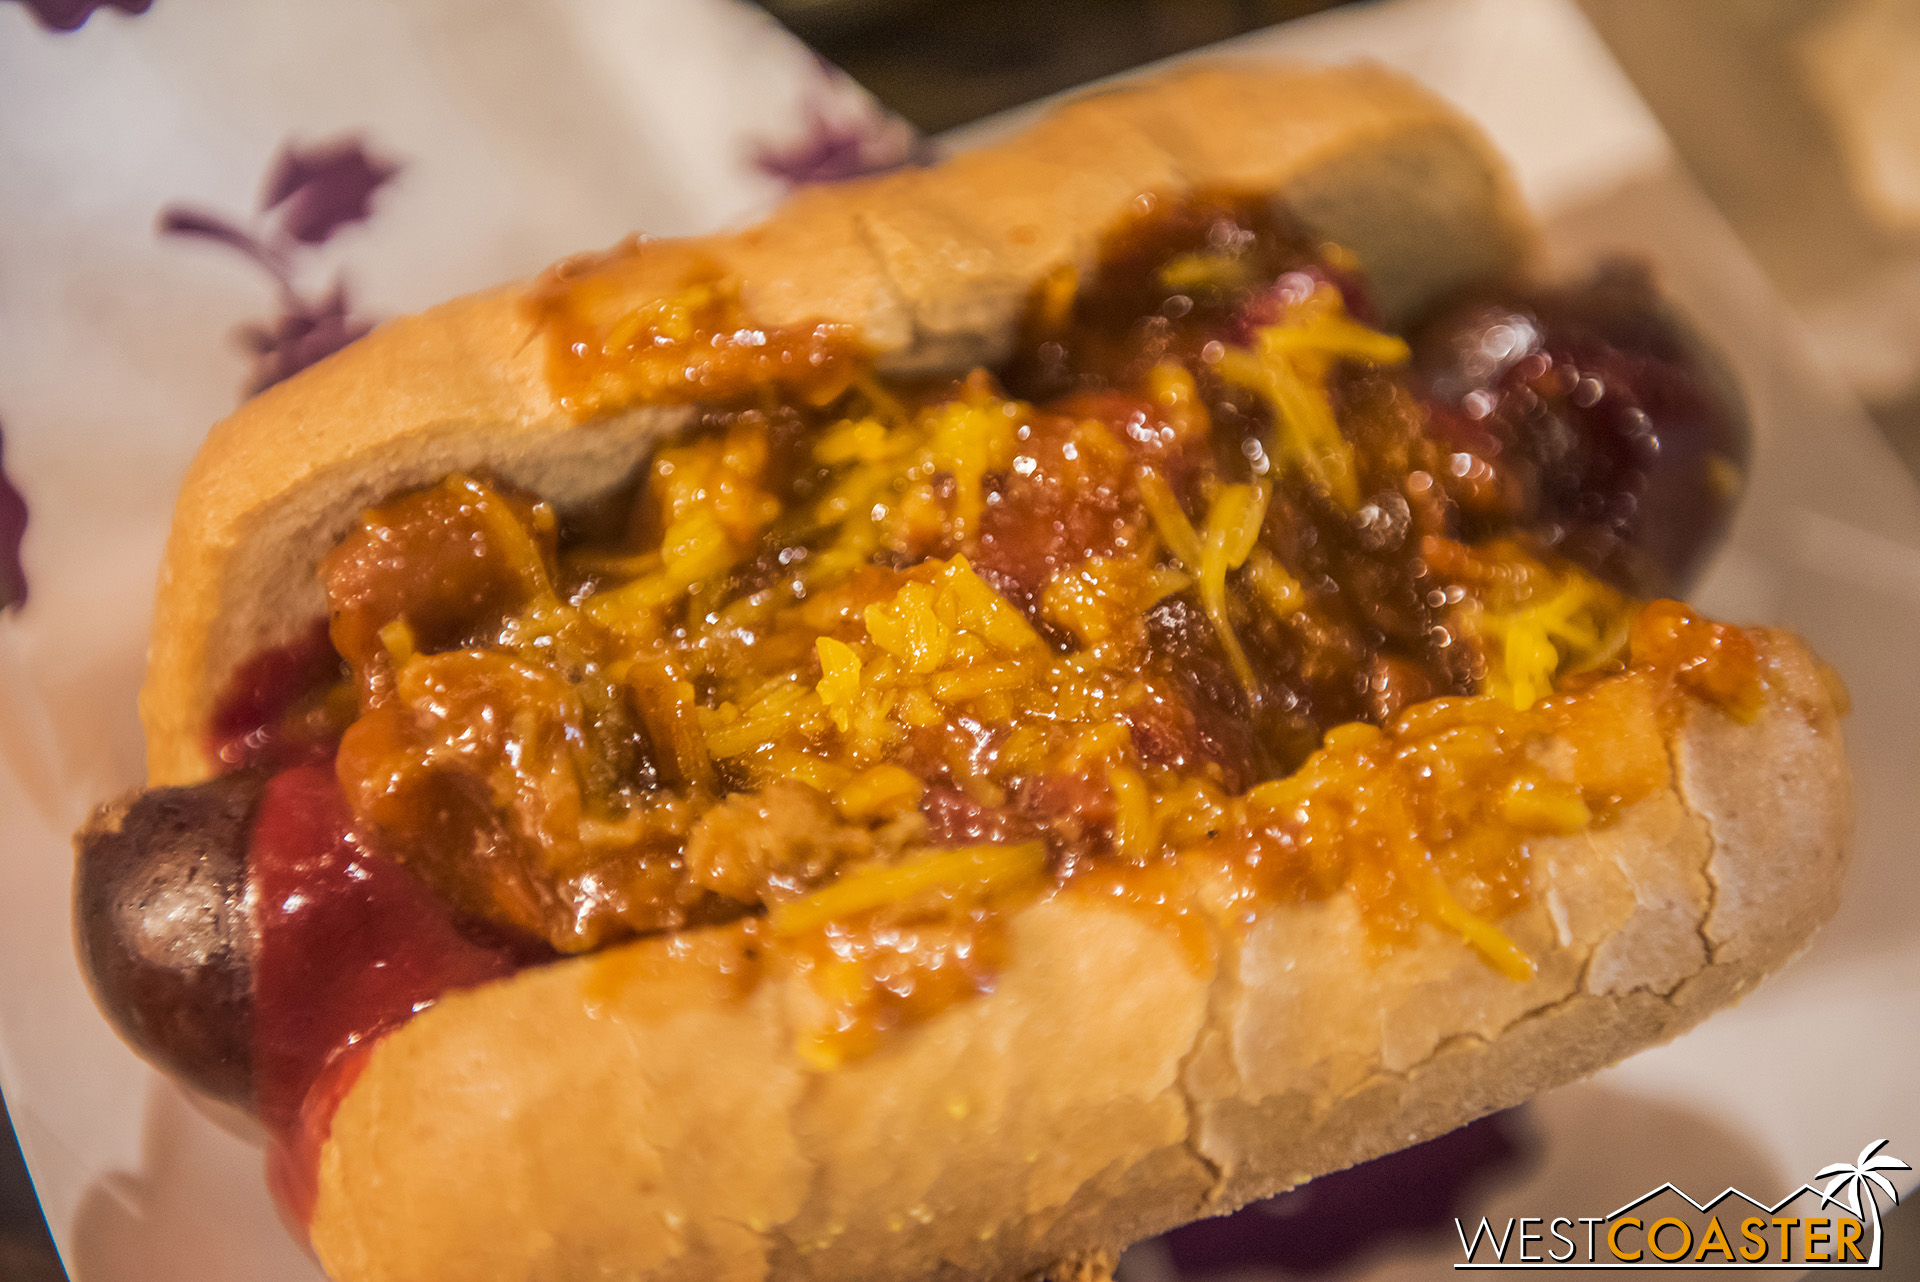  Food Hack: Combine the two for a delicious chili dog! 